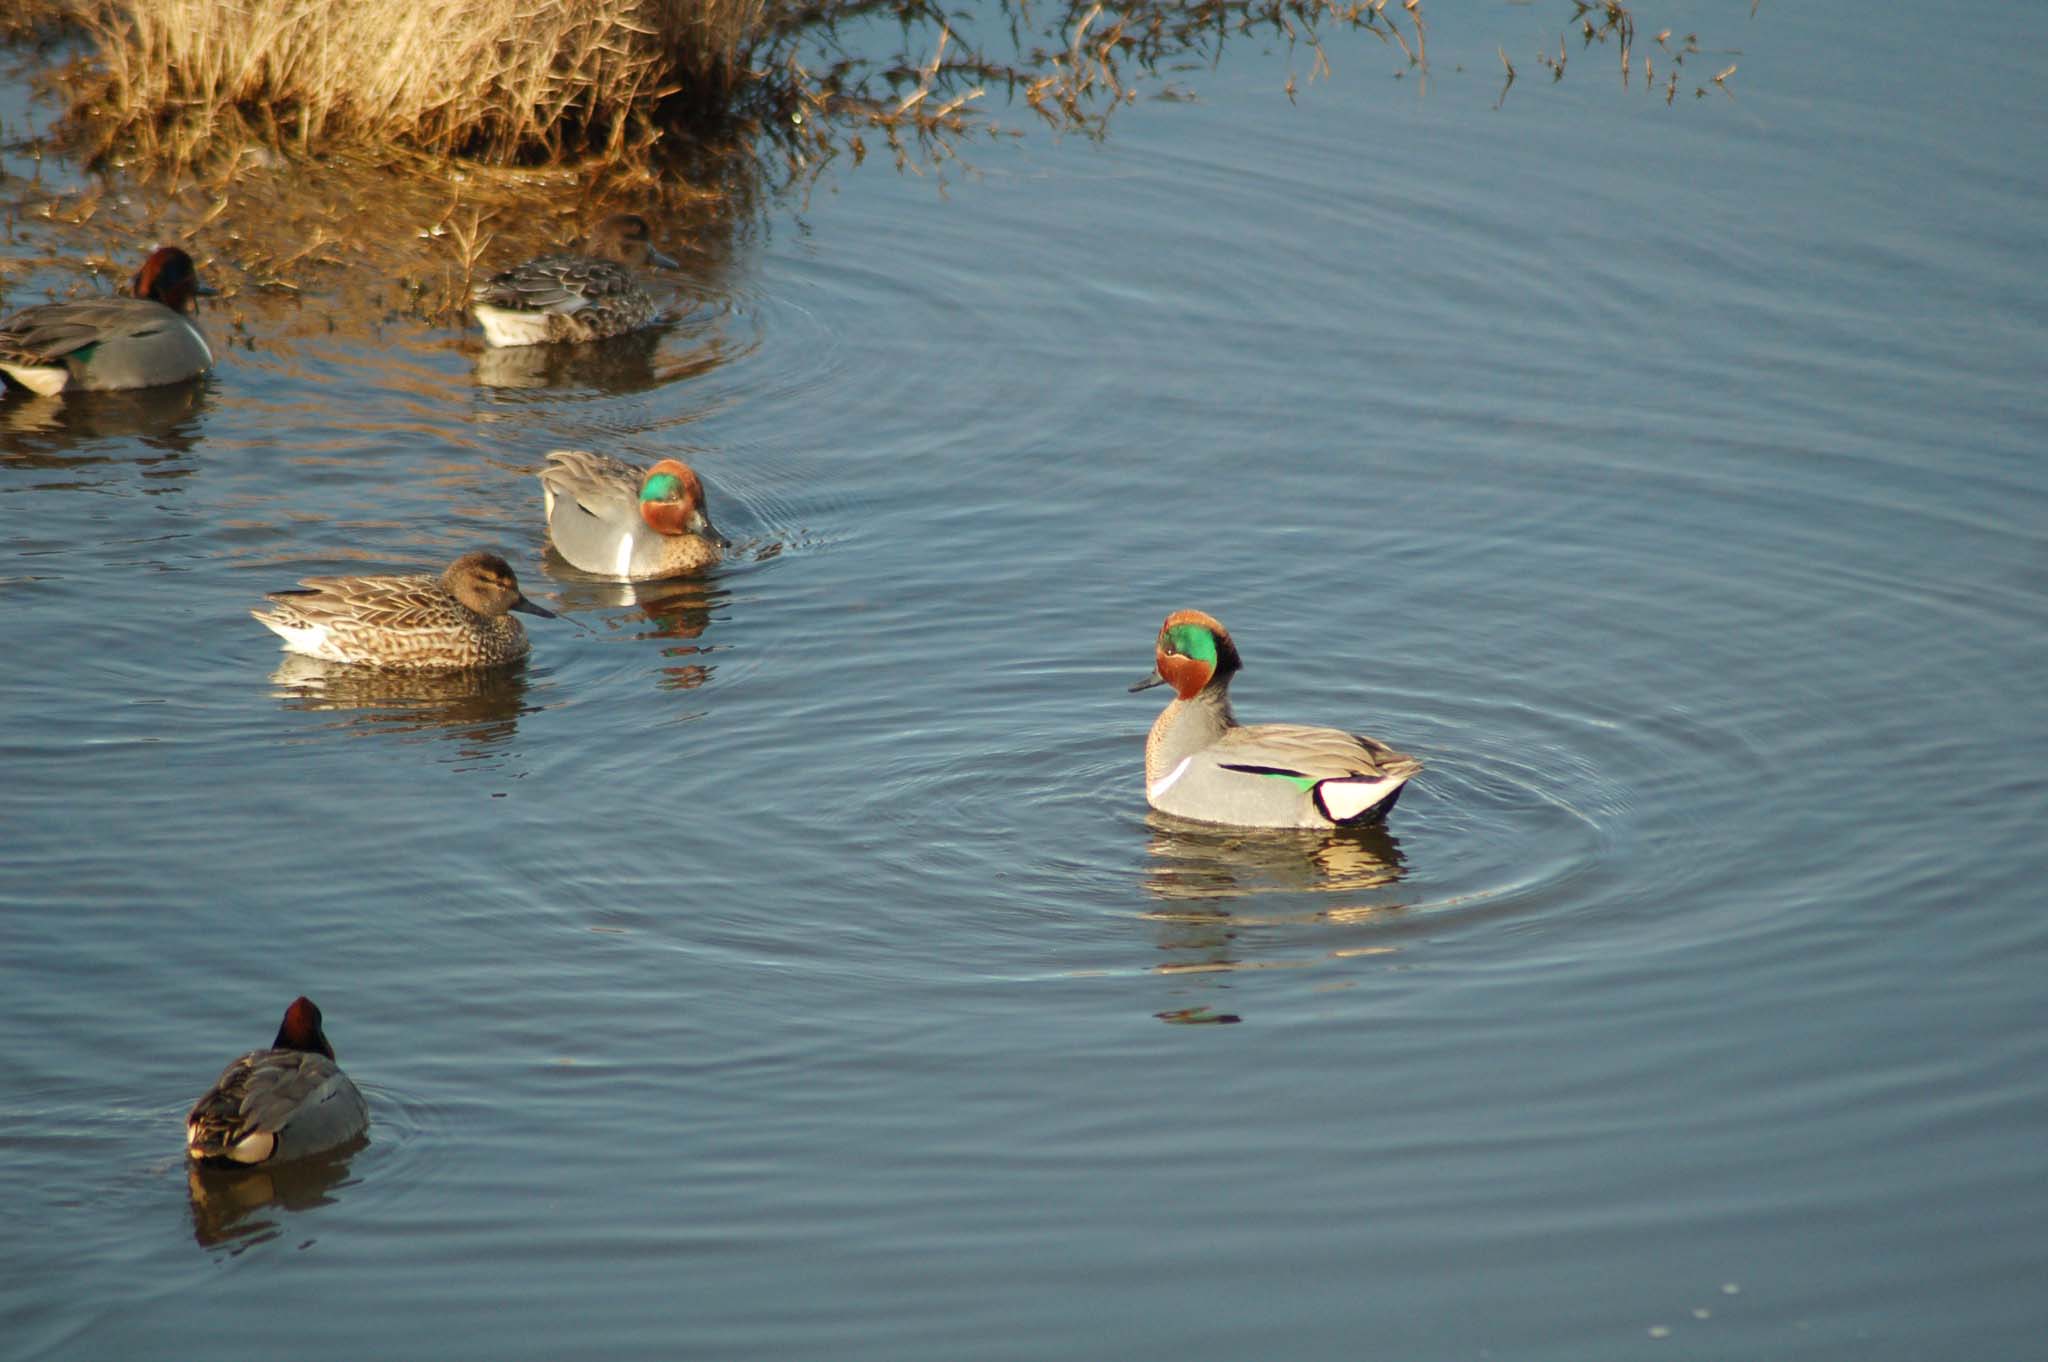 A group of ducks in the water